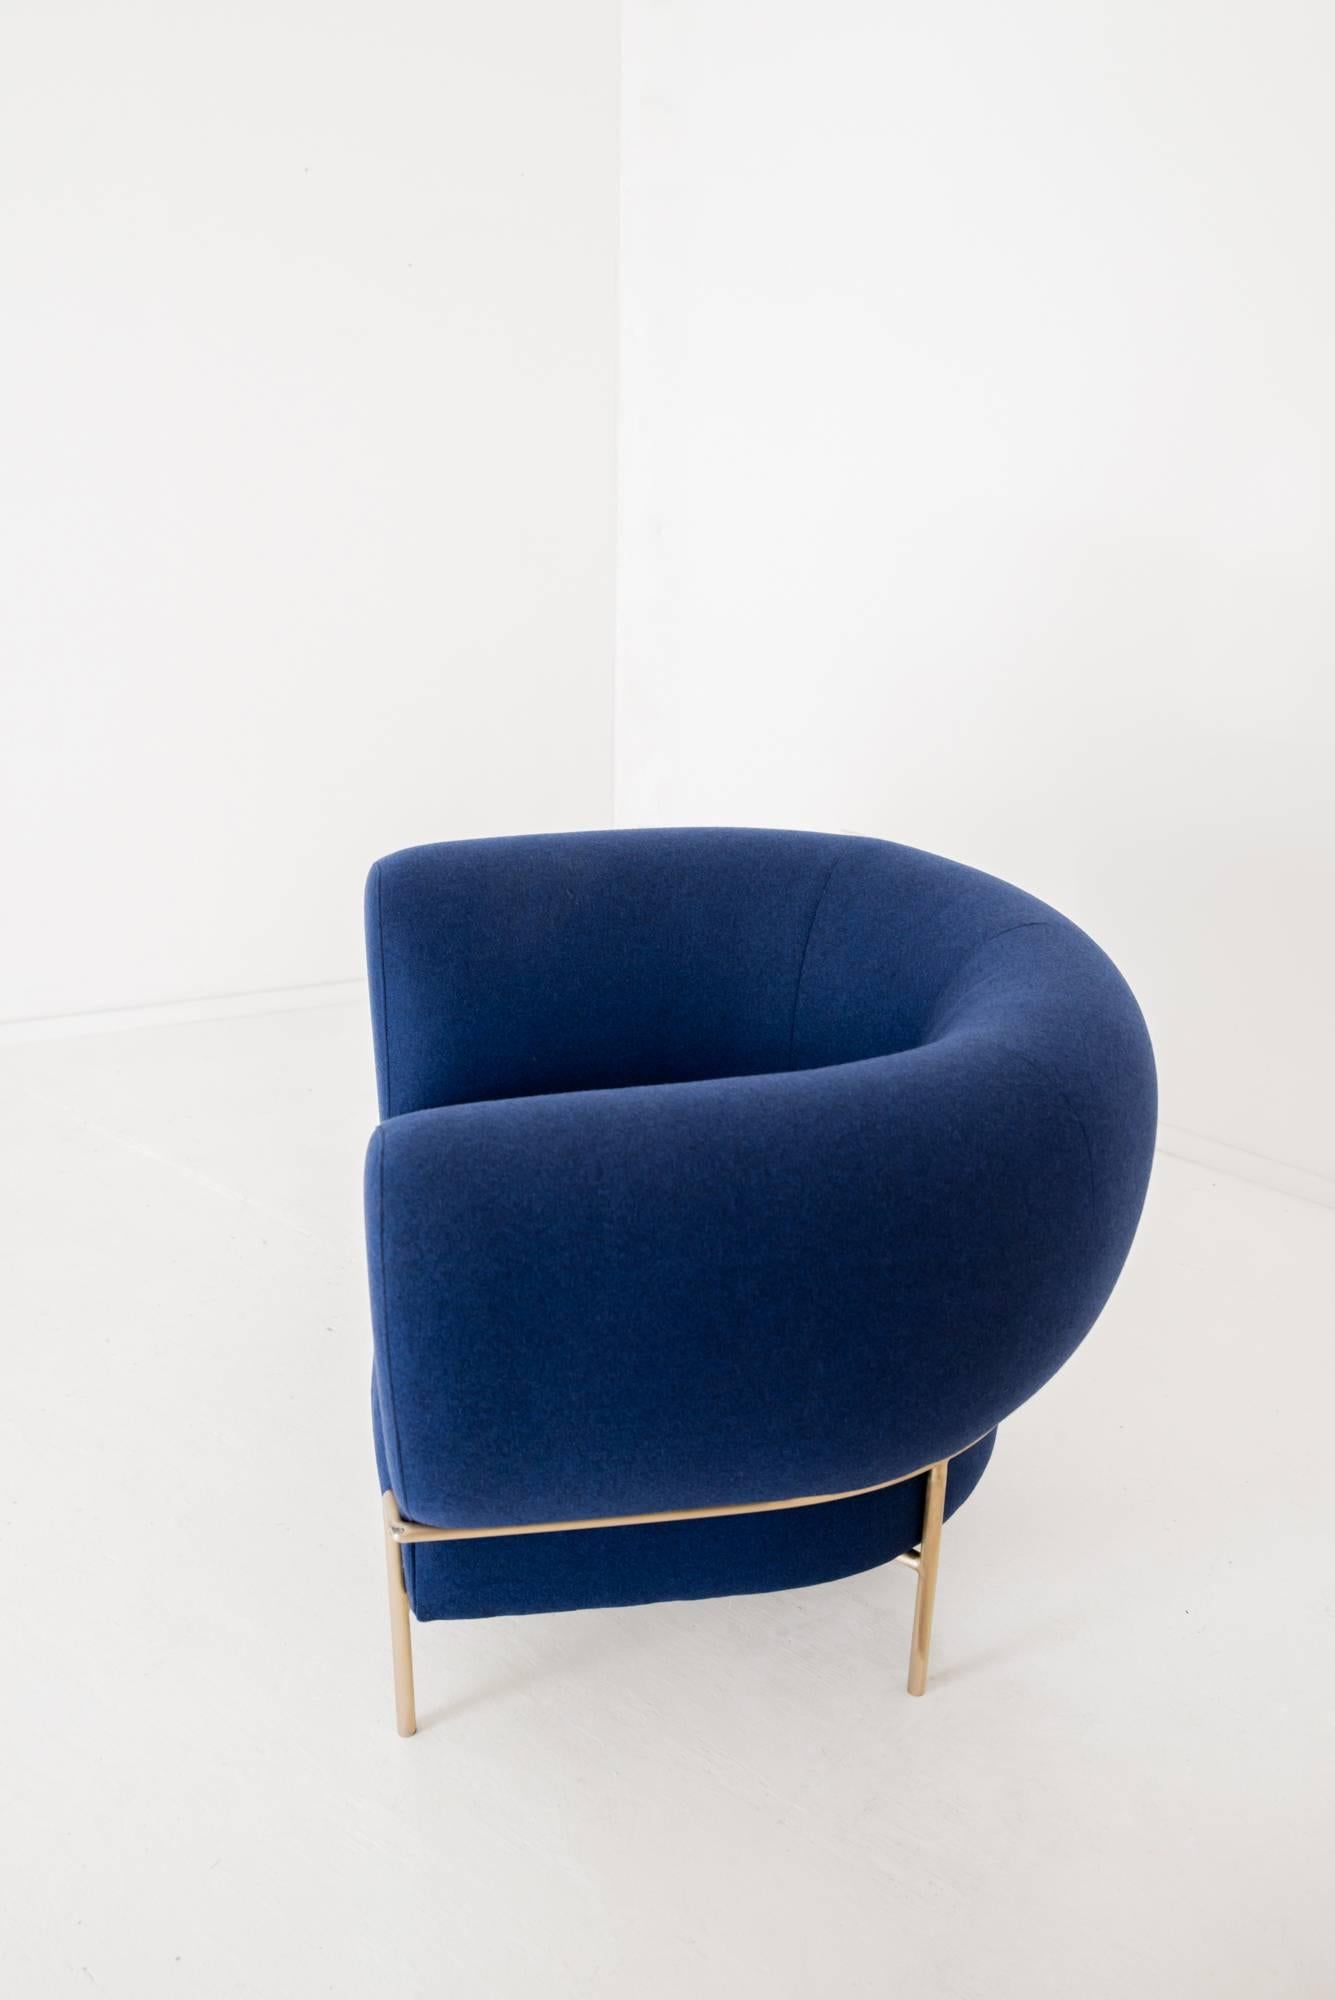 American Contemporary Madda Lounge Chair in Blue Wool For Sale